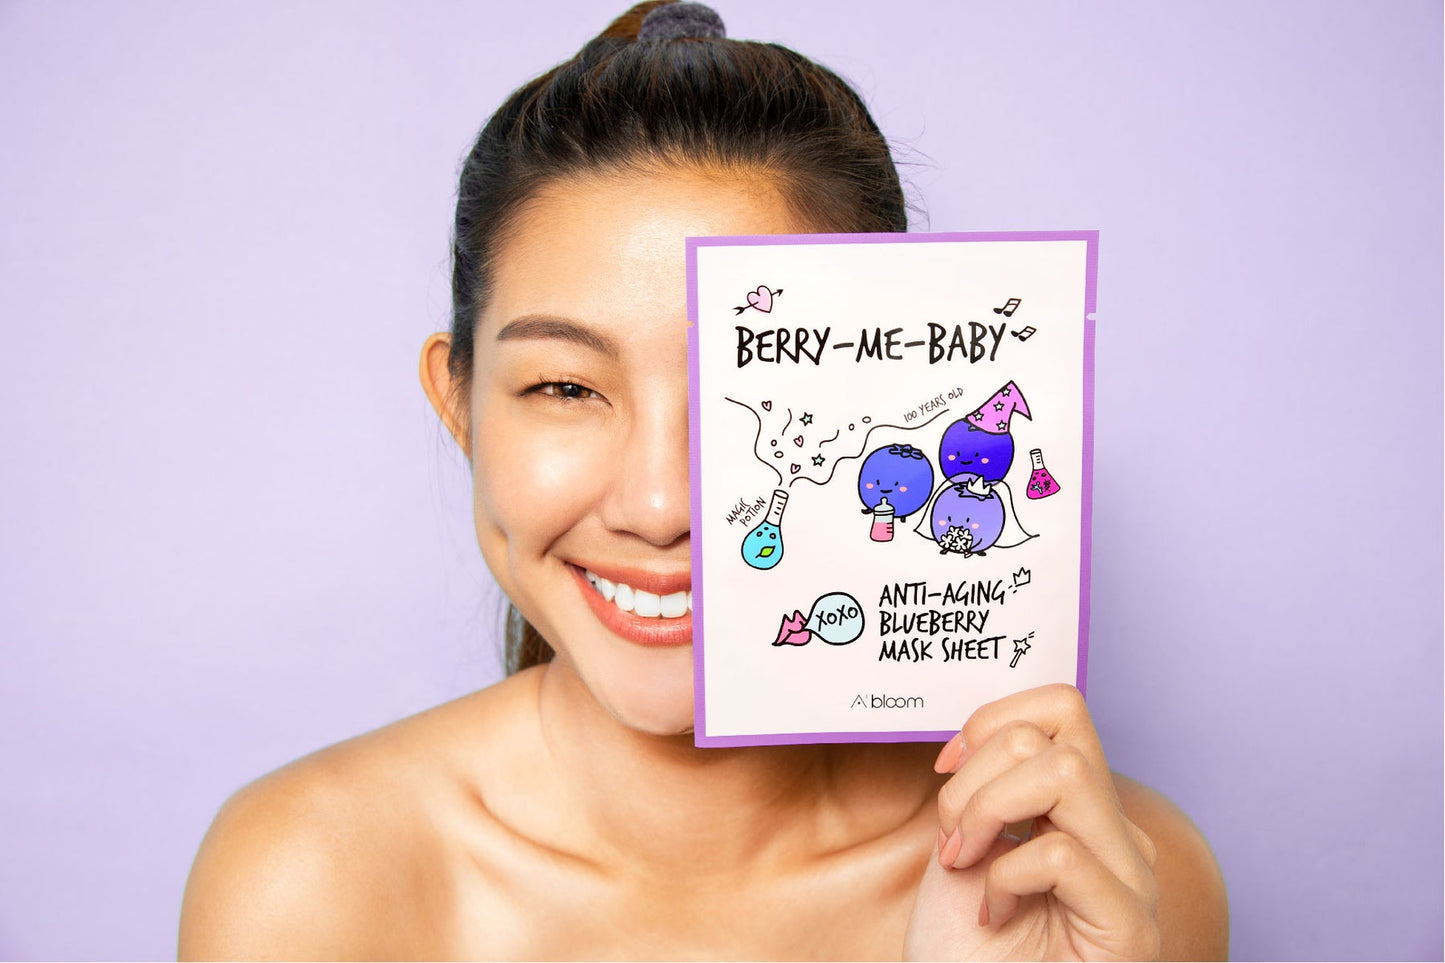 A'BLOOM Berry-Me-Baby Anti-aging Blueberry Mask (1 Sheet)